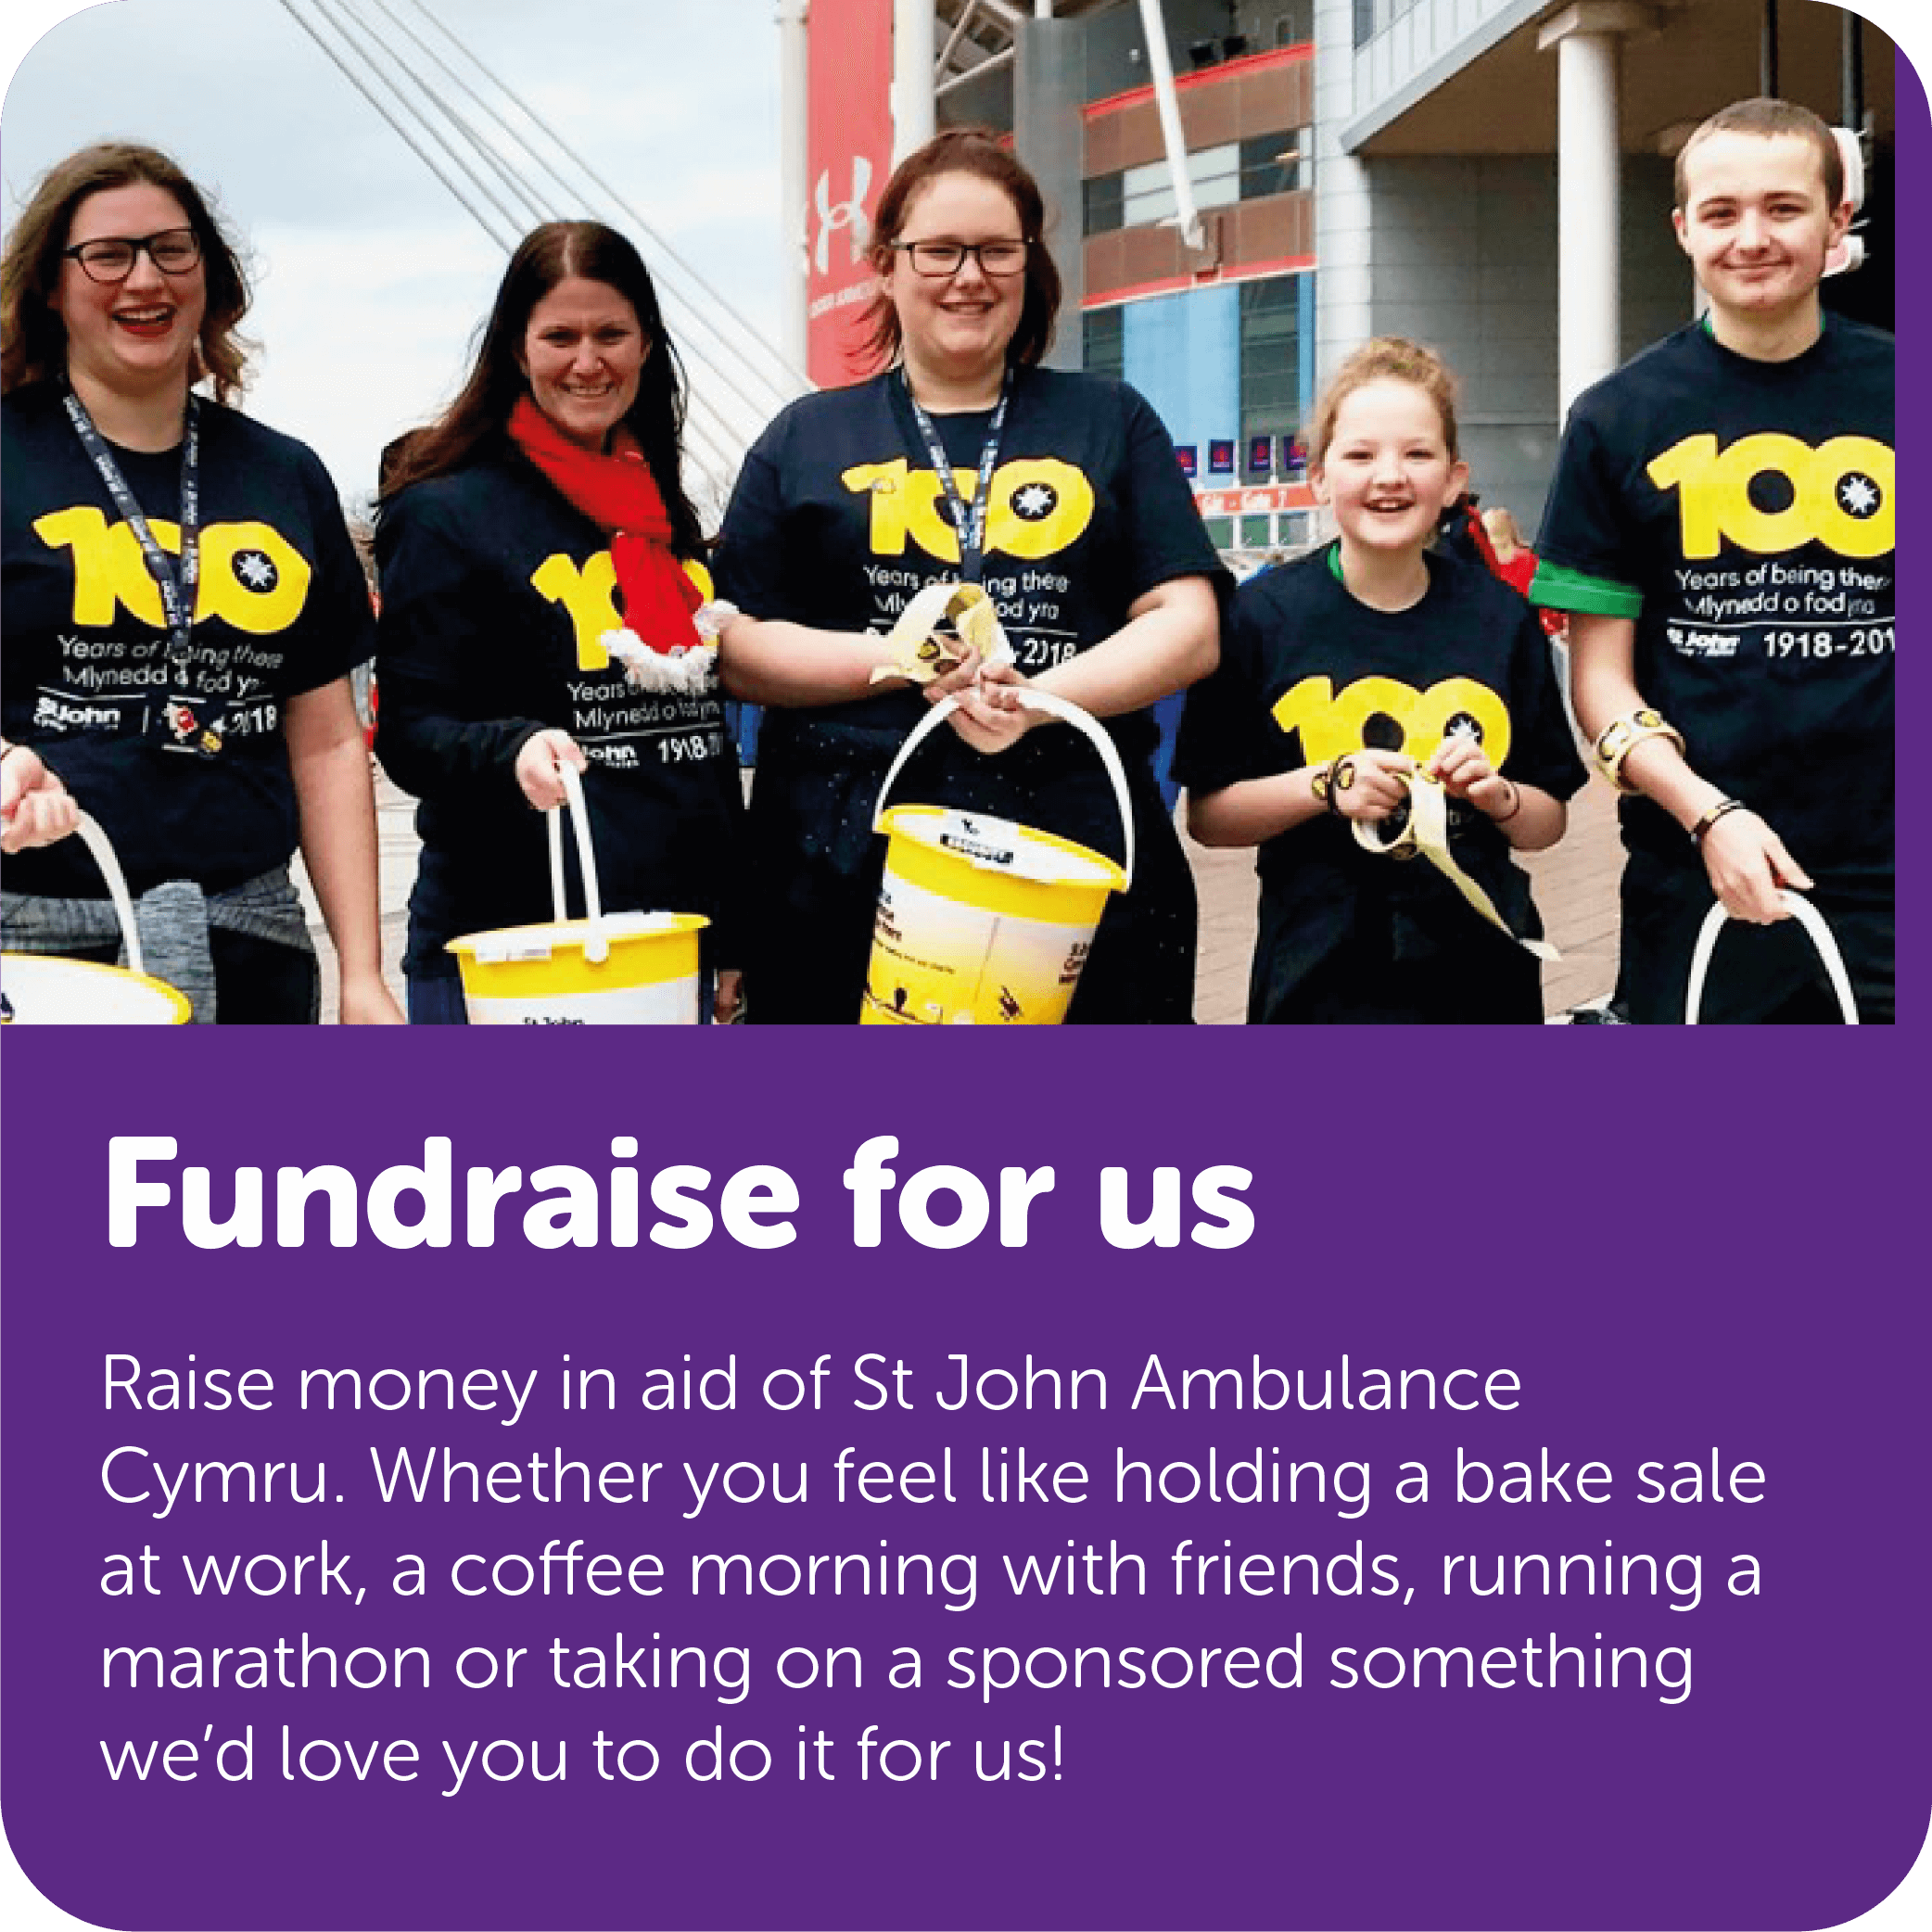 Raise money in aid of St John Ambulance Cymru. Whether you feel like holding a bake sale at work, a coffee morning with friends, running a marathon or taking on a sponsored something we'd love you to do it for us!